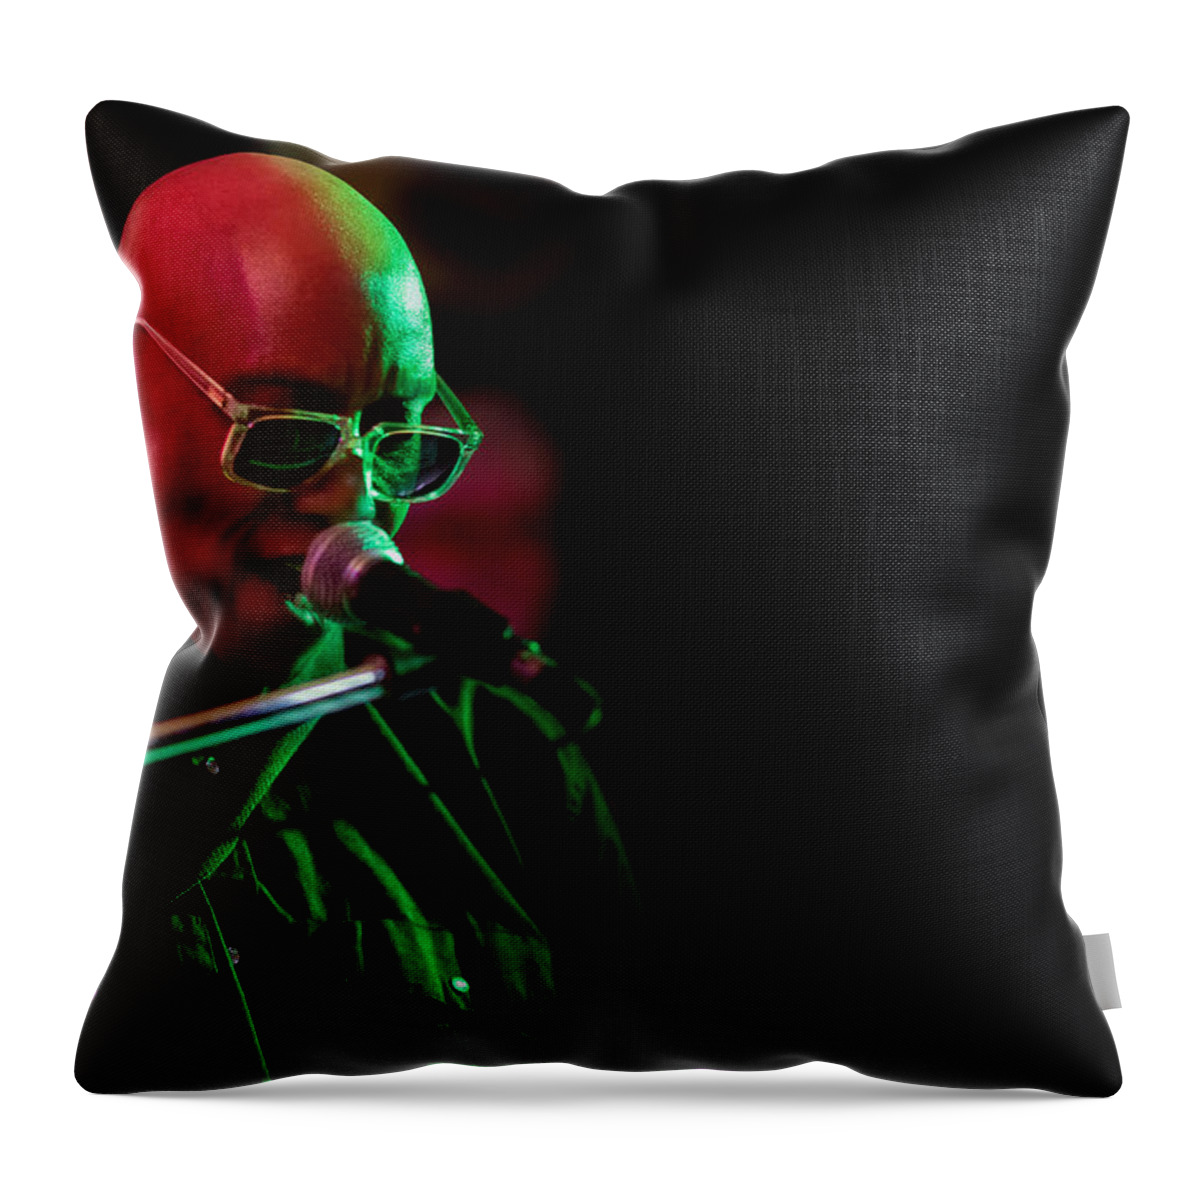 Coolrunnings Bistro Throw Pillow featuring the photograph Singing. Seriously. by Jim Whitley